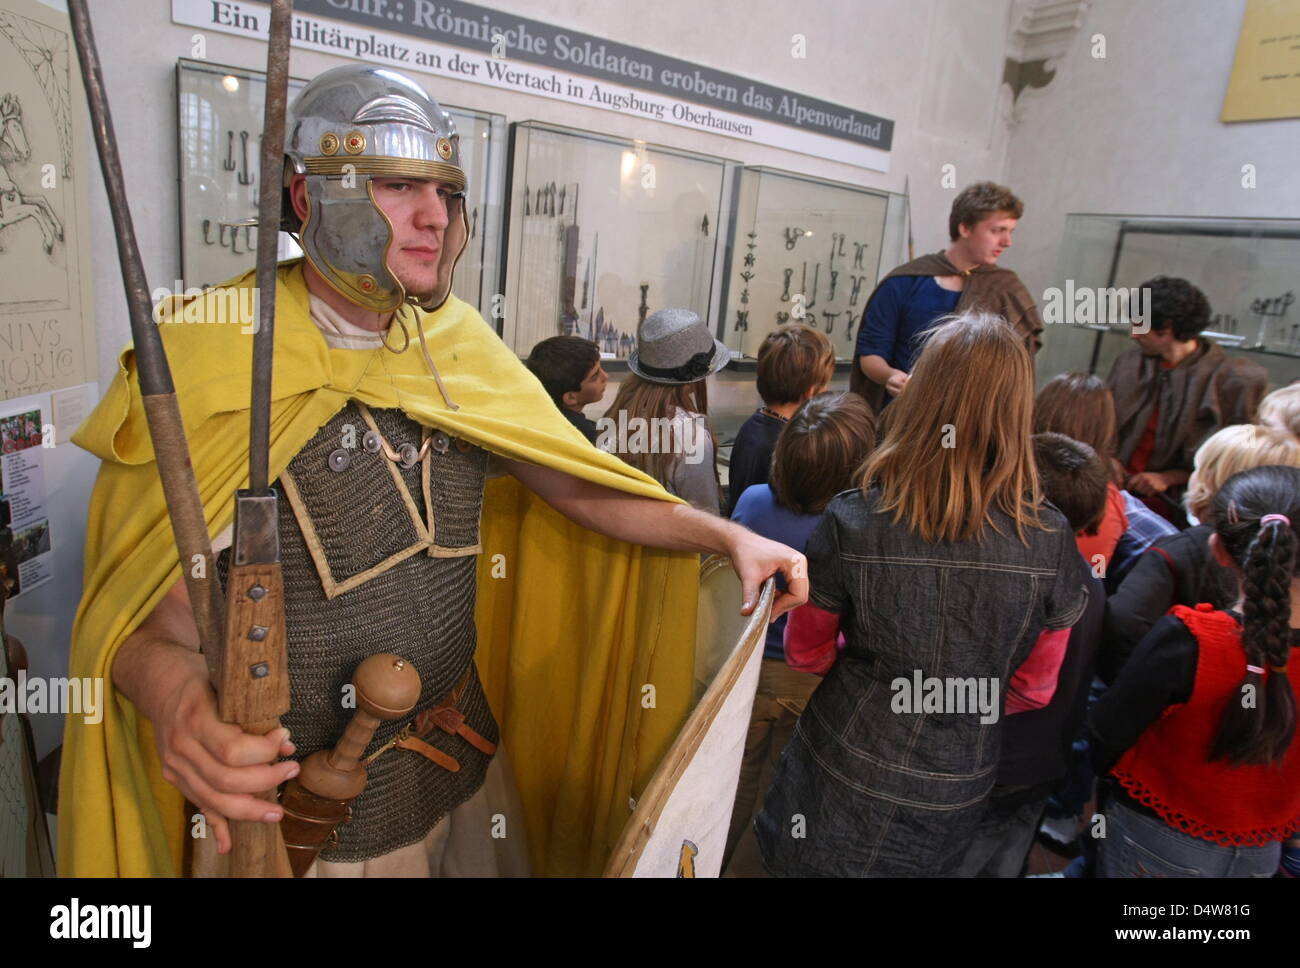 A man dressed-up as Roman soldier leads pupils through an exhibition at Roman Museum in Augsburg, Germany, 17 September 2010. Photo: Karl-Josef Hildenbrand Stock Photo